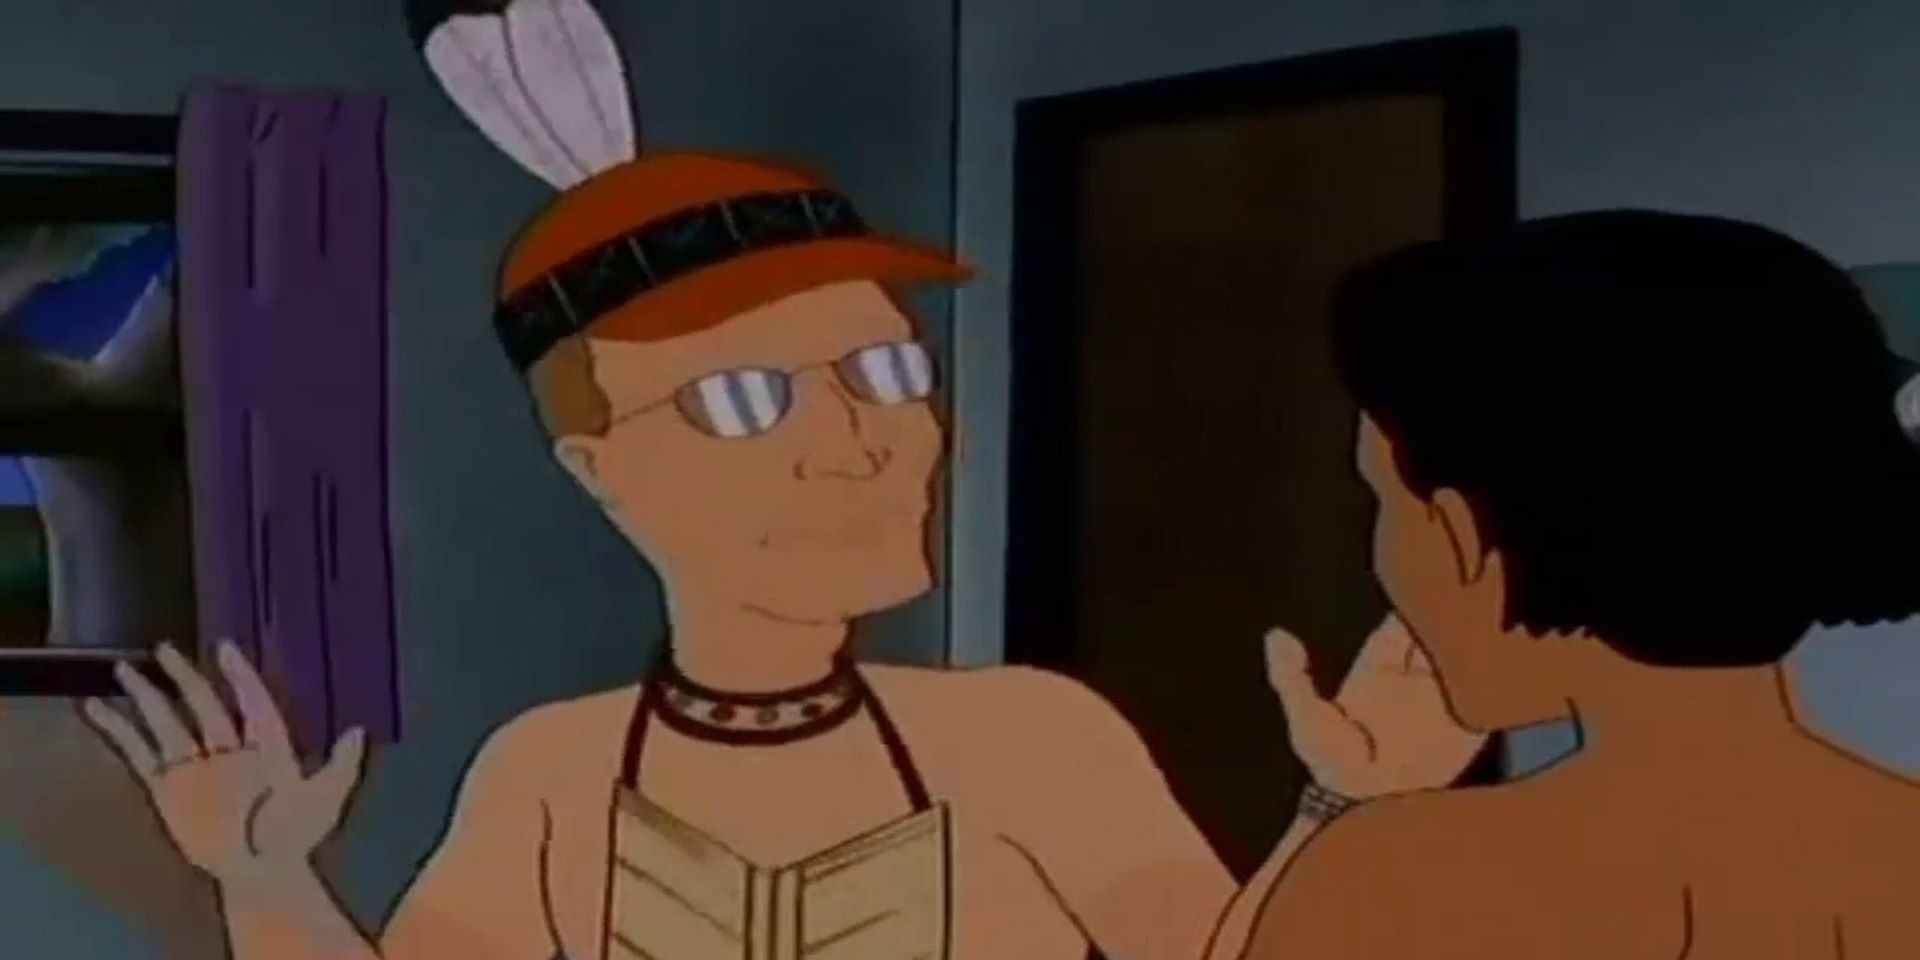 Dale Dressed as a Native American